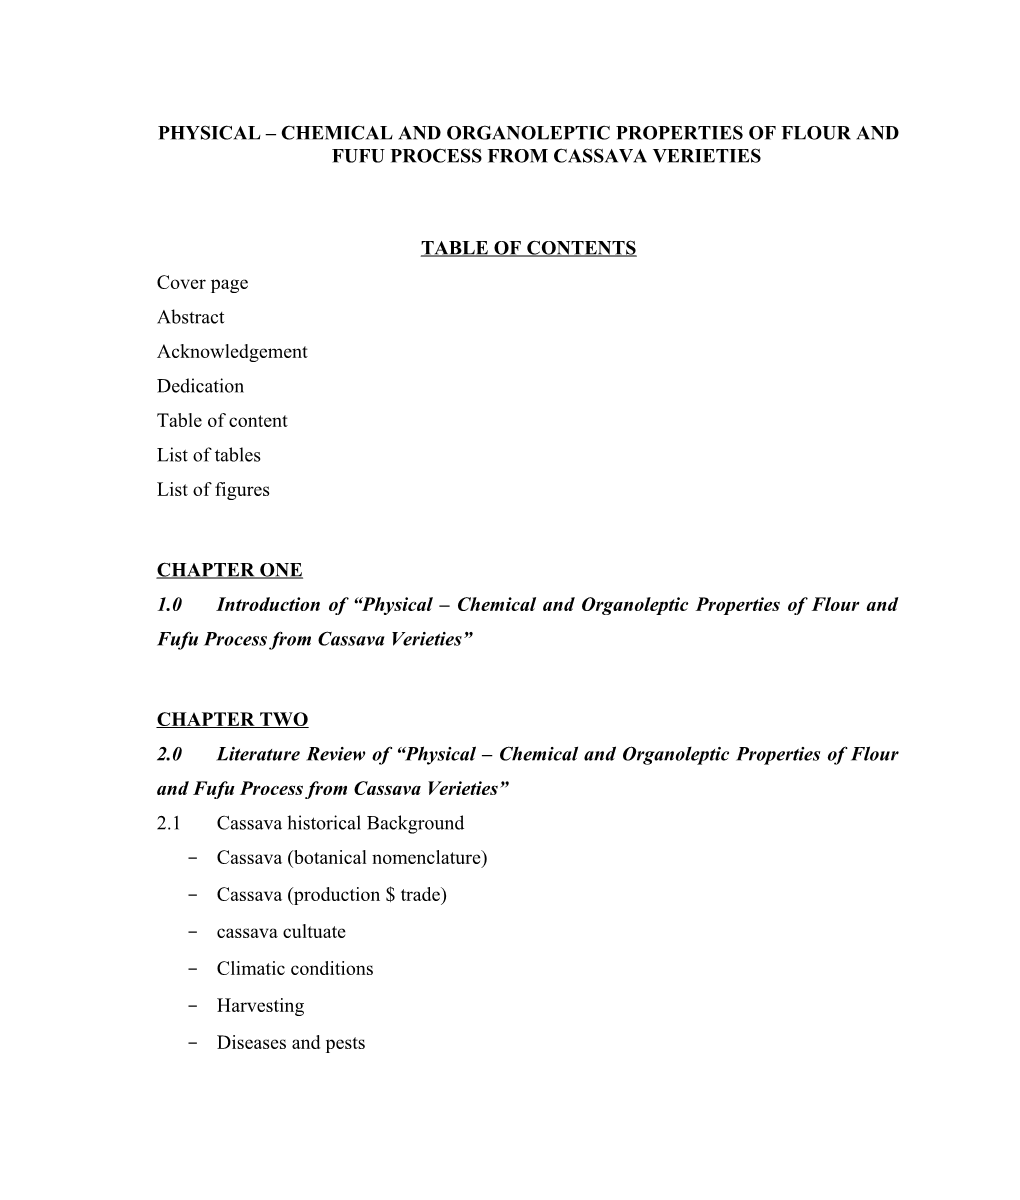 Physical Chemical and Organoleptic Properties of Flour and Fufu Process from Cassava Verieties